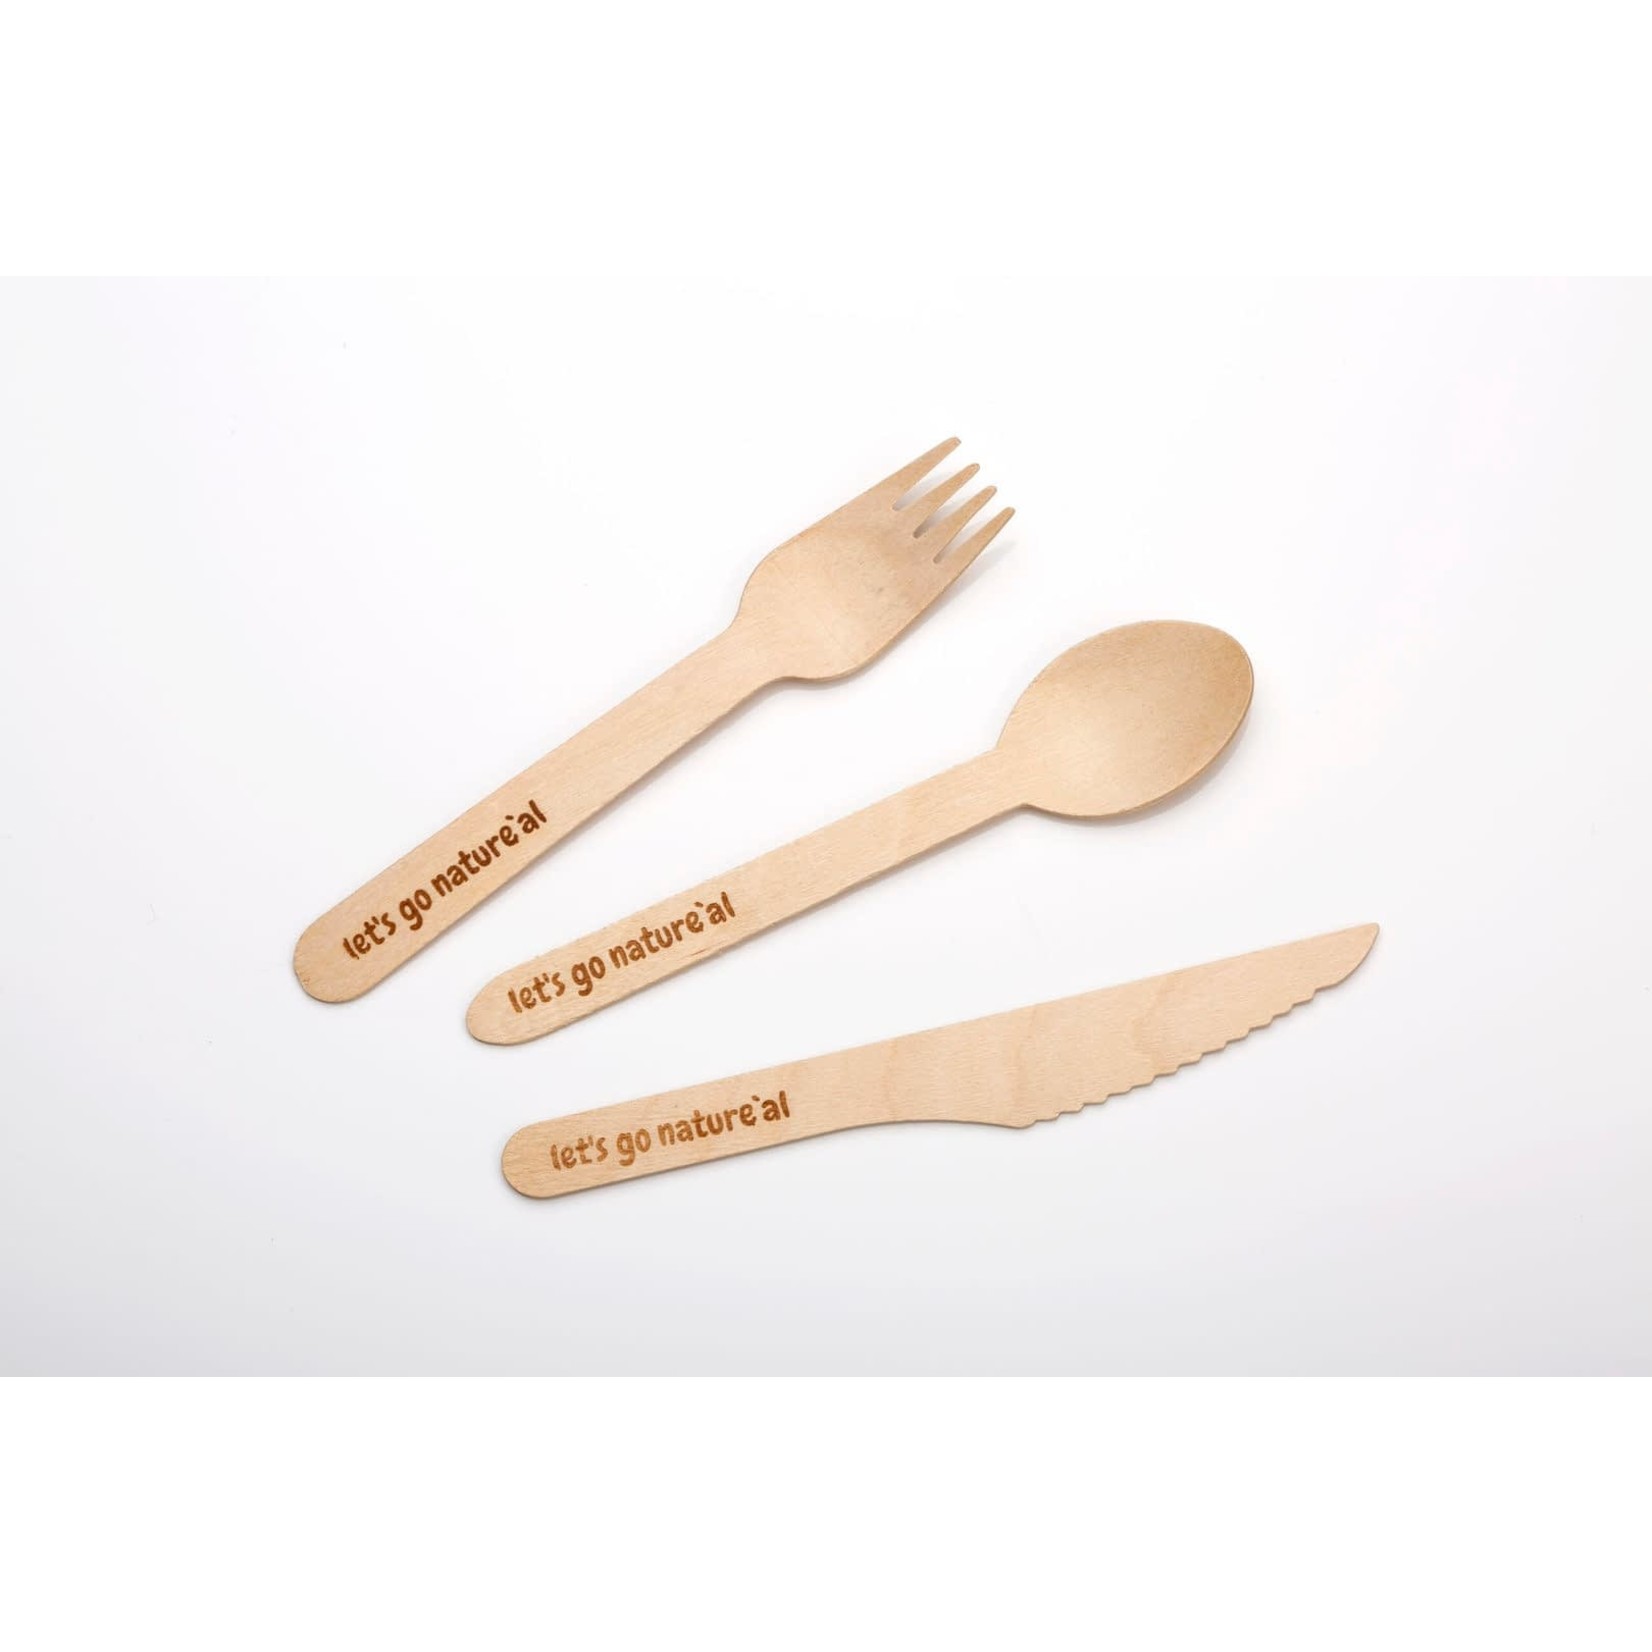 Let's Go Nature'al Let's Go Natureal Compostable Wooden Cutlery 100pk